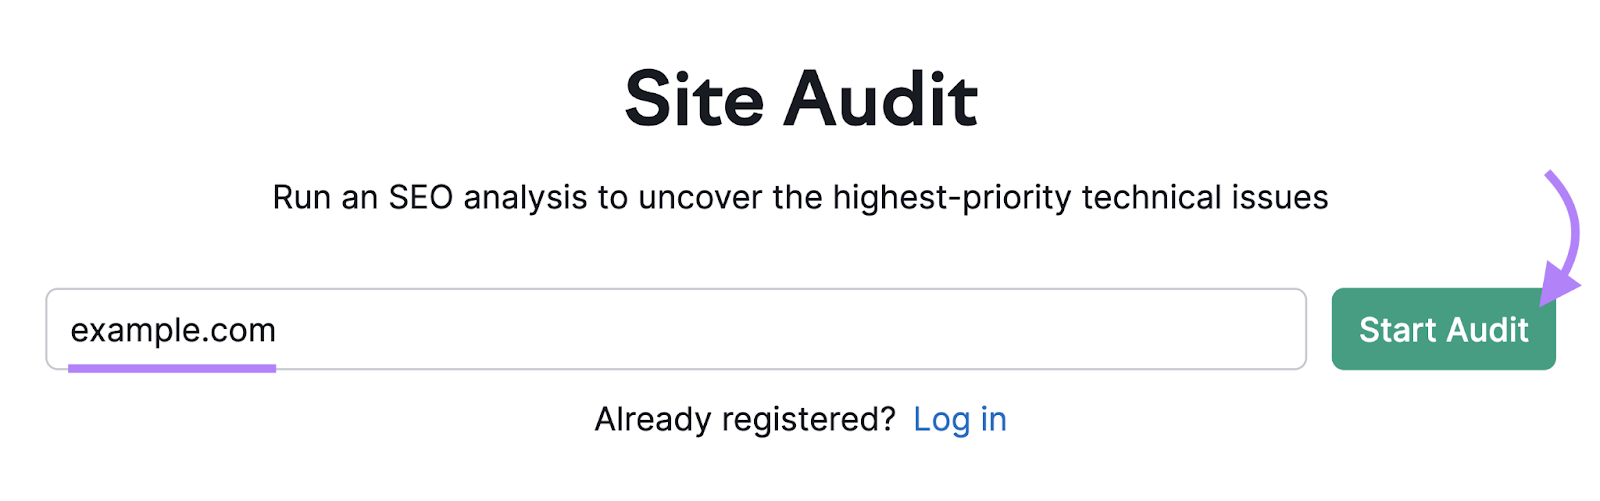 Site Audit tool search bar